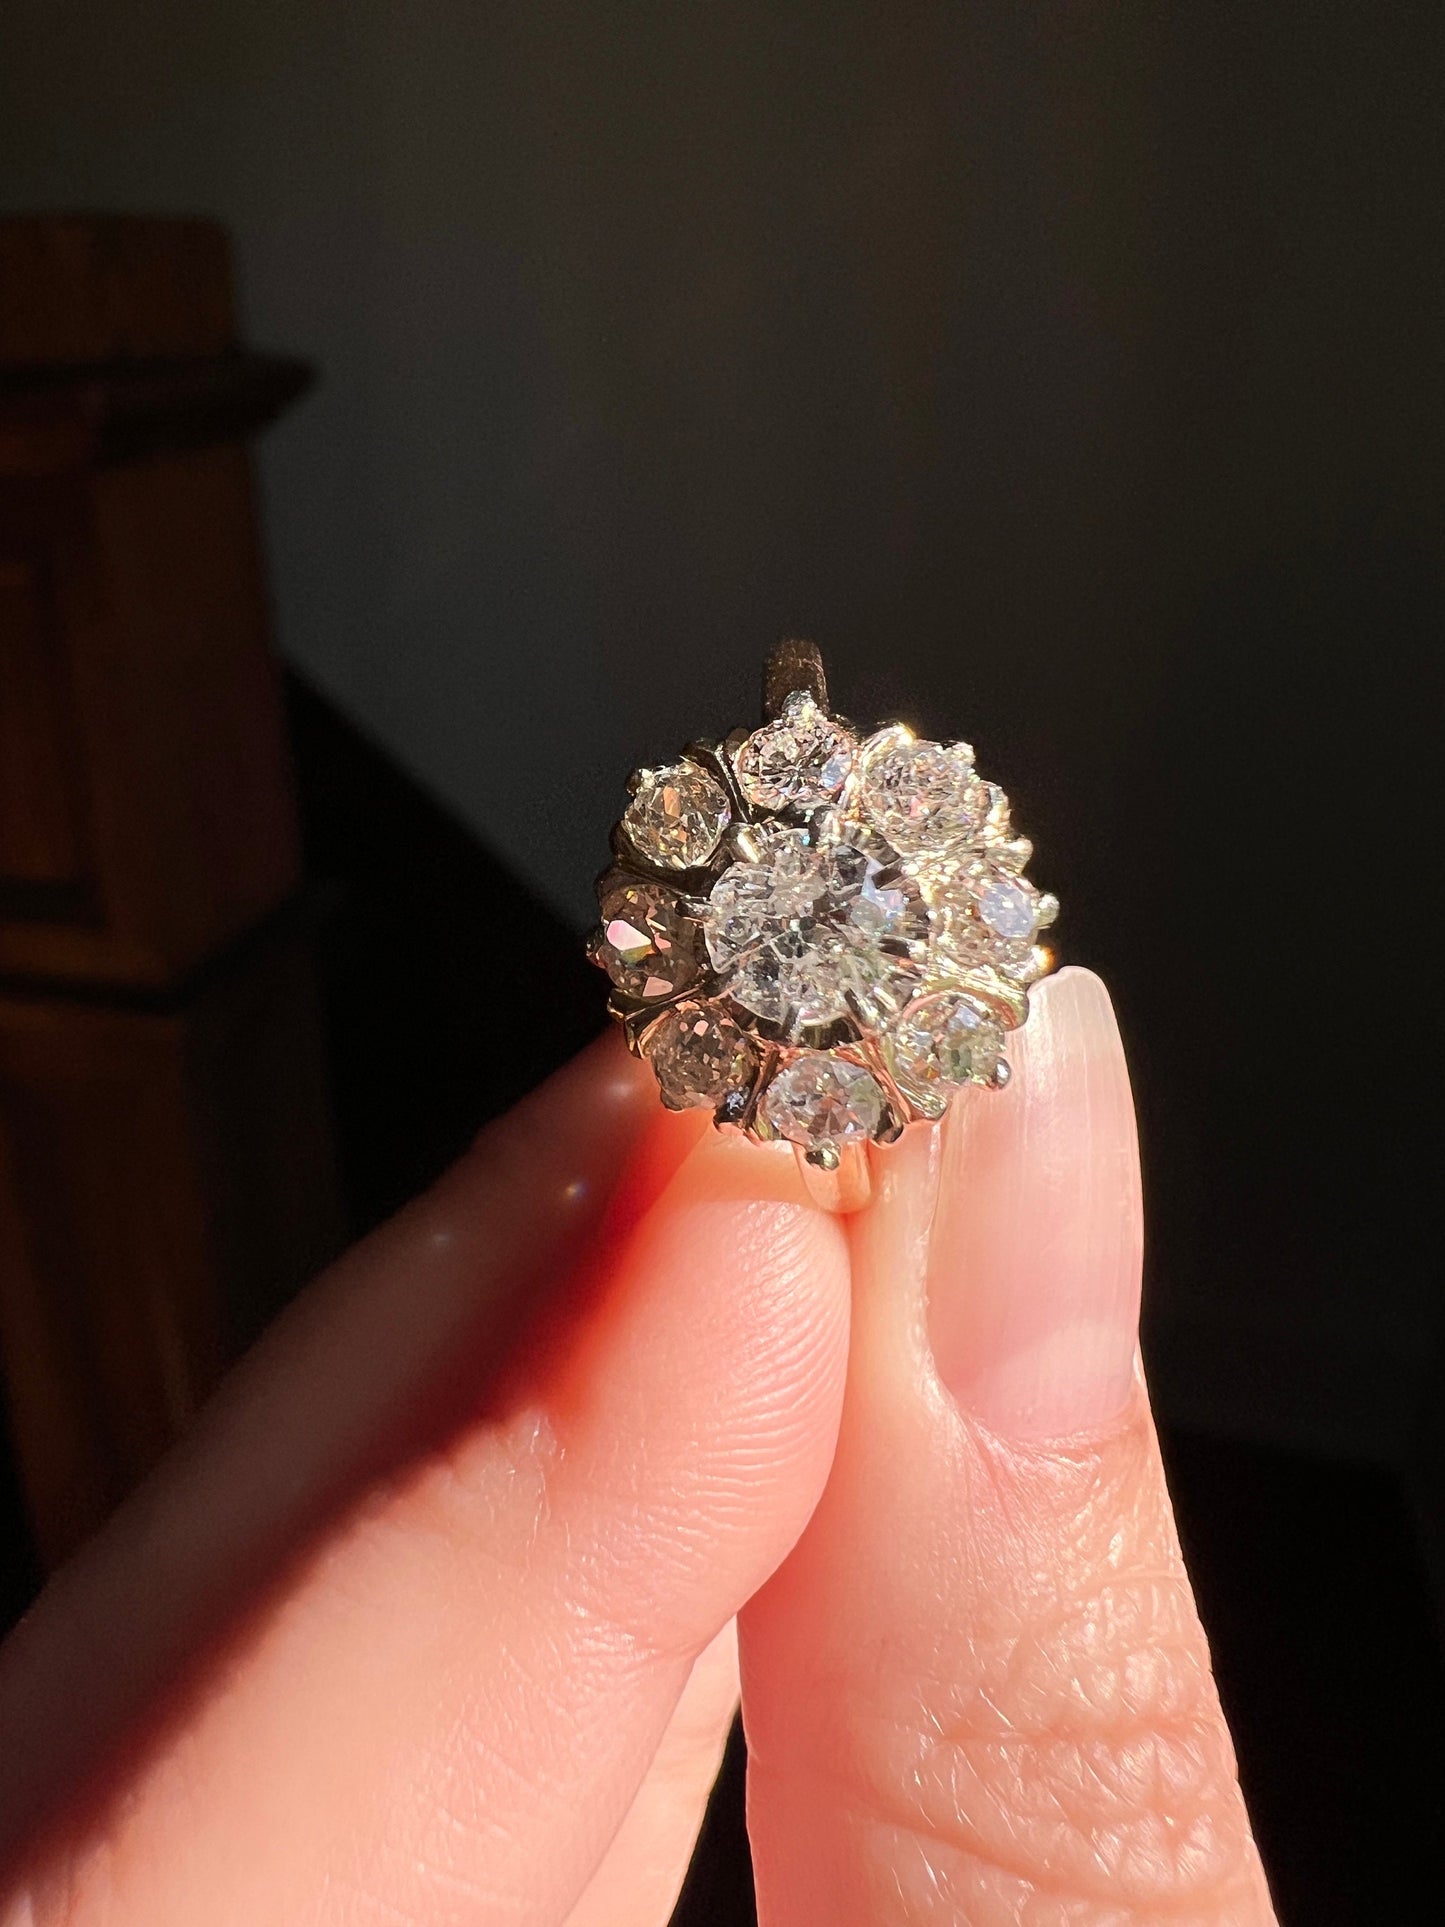 Daisy CLUSTER Ring 1 1/2 Carat Old Mine Cut Diamond Halo 18k Gold French Antique Belle Epoque 1.5Ctw Tdw Romantic Gift OmC Stacker Victorian